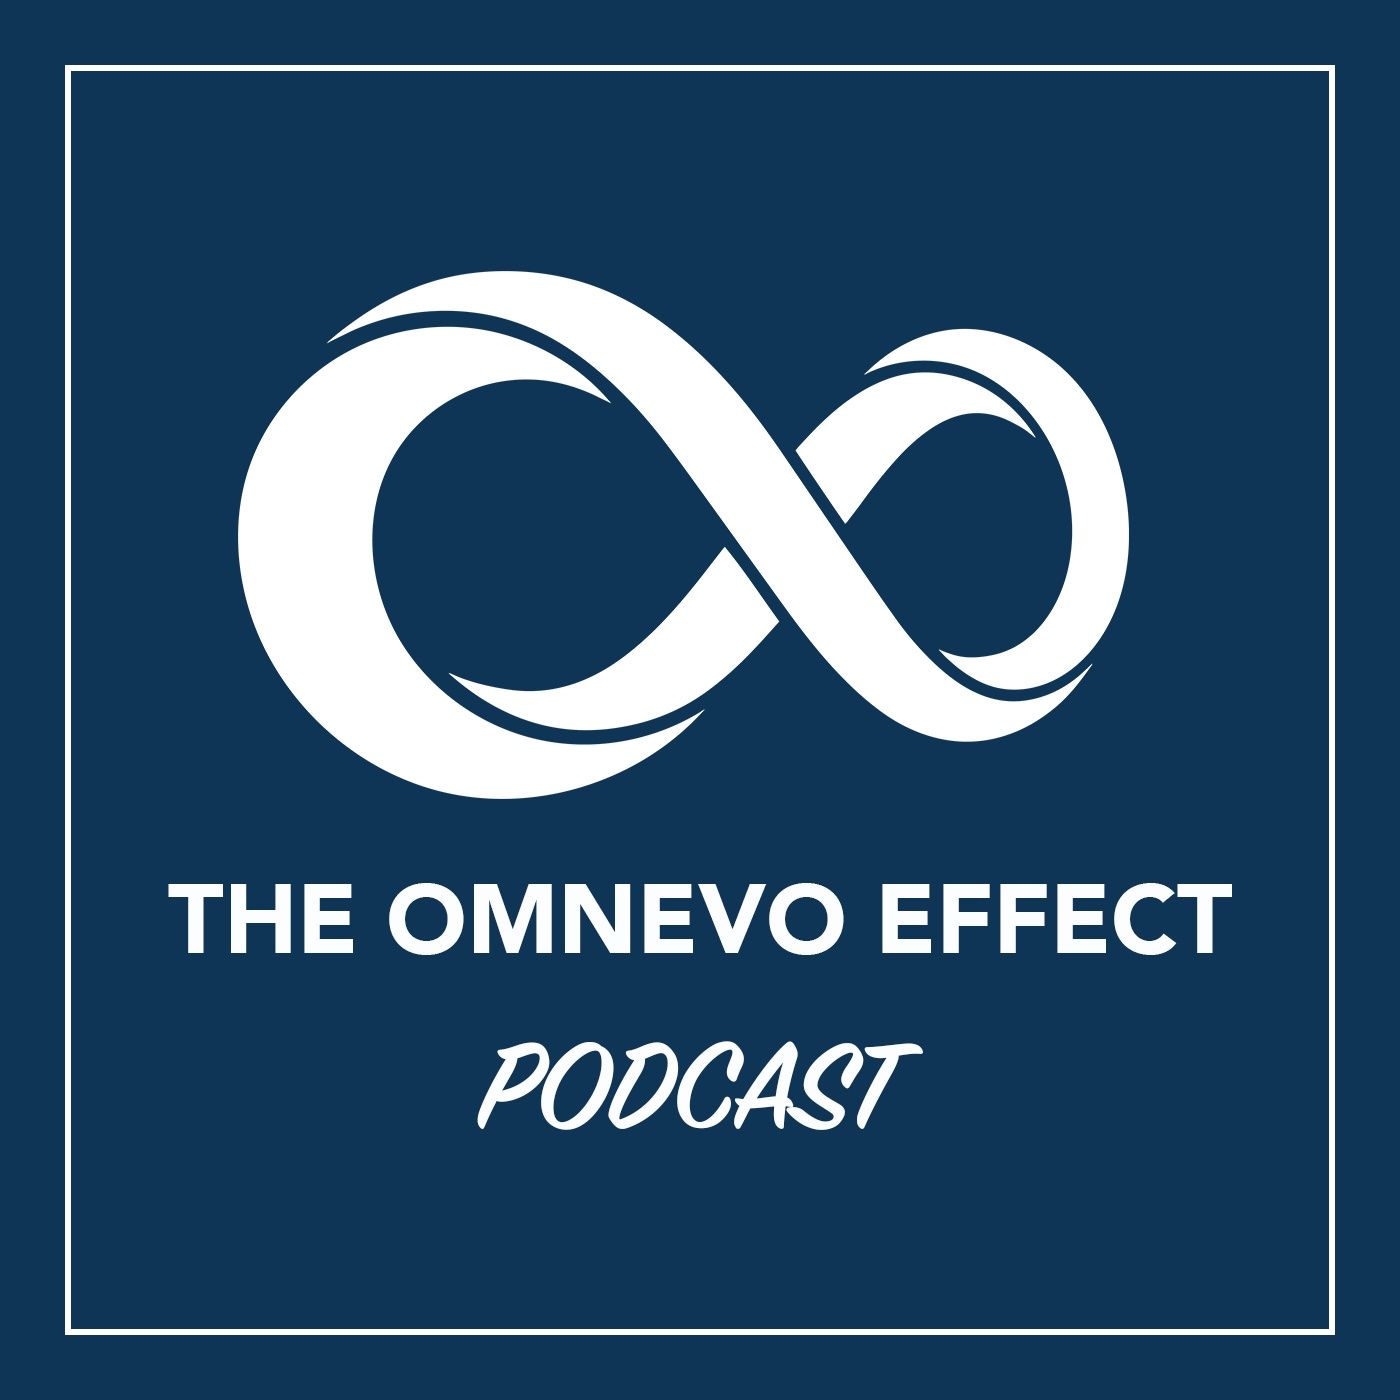 The Omnevo Effect